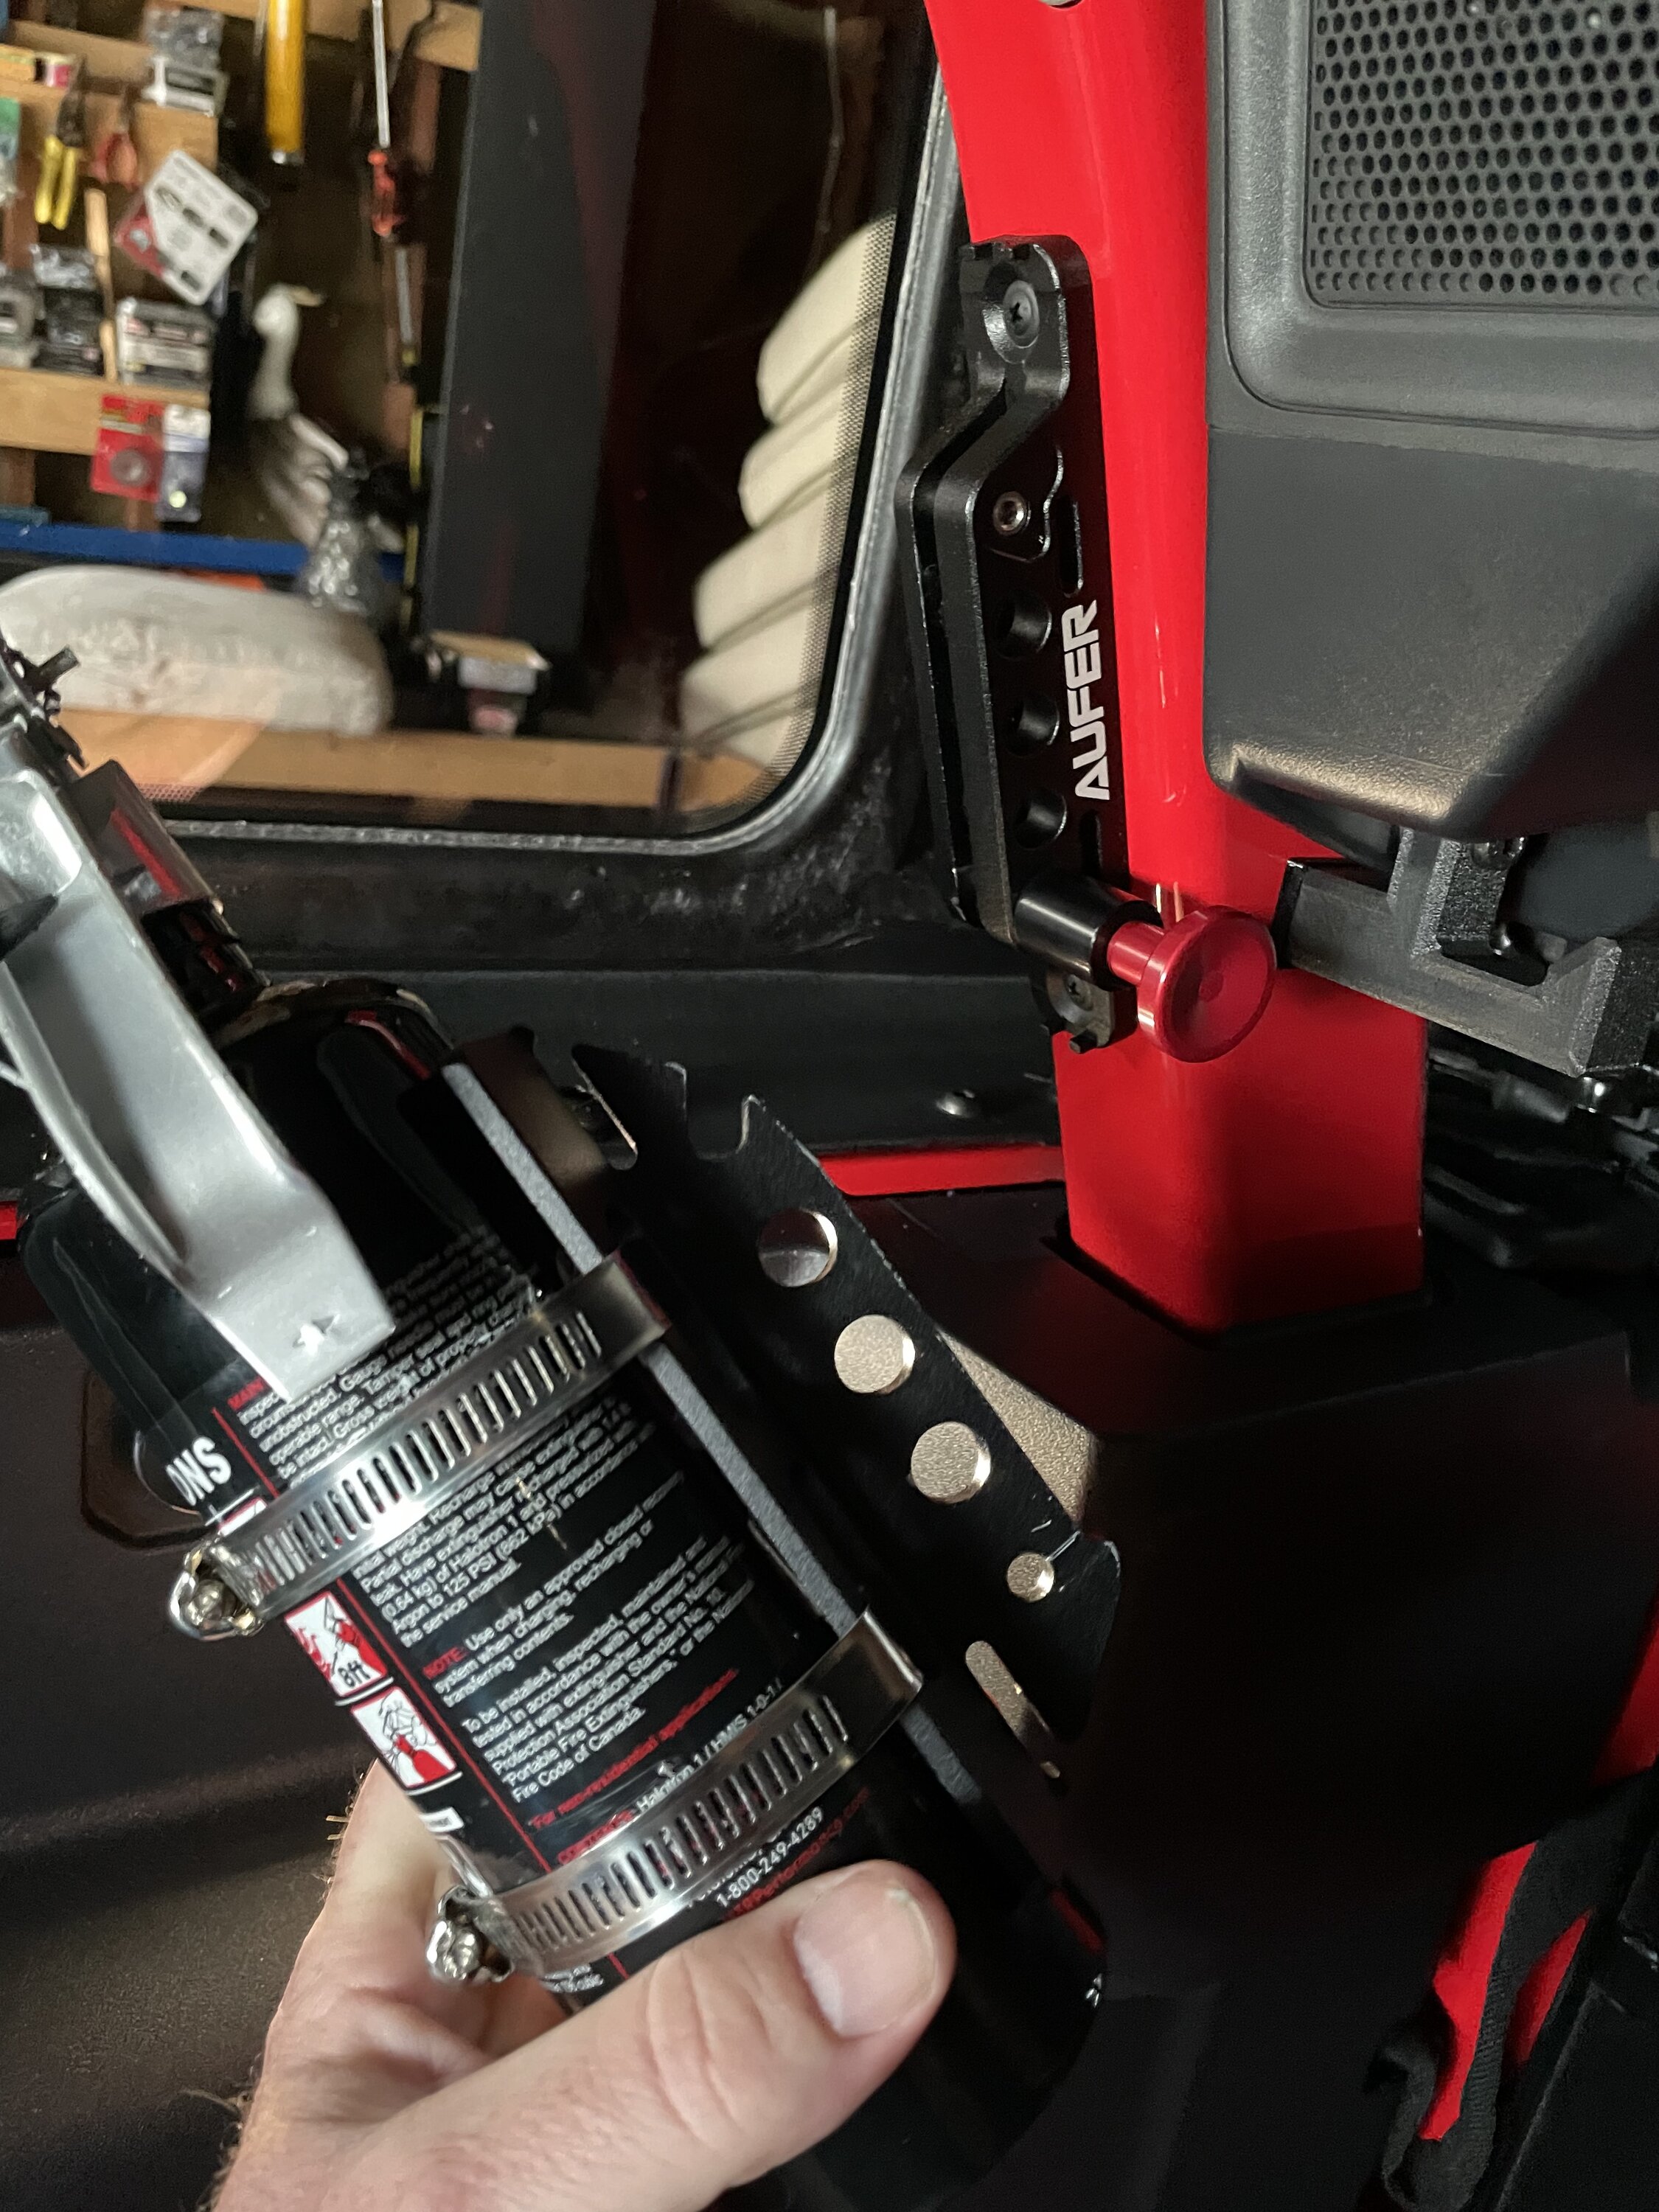 Ford Bronco Fire Extinguisher Mounting in the Bronco - Show Your Installs 7FE860ED-CC7F-4882-8E2E-294E69C9C0DB